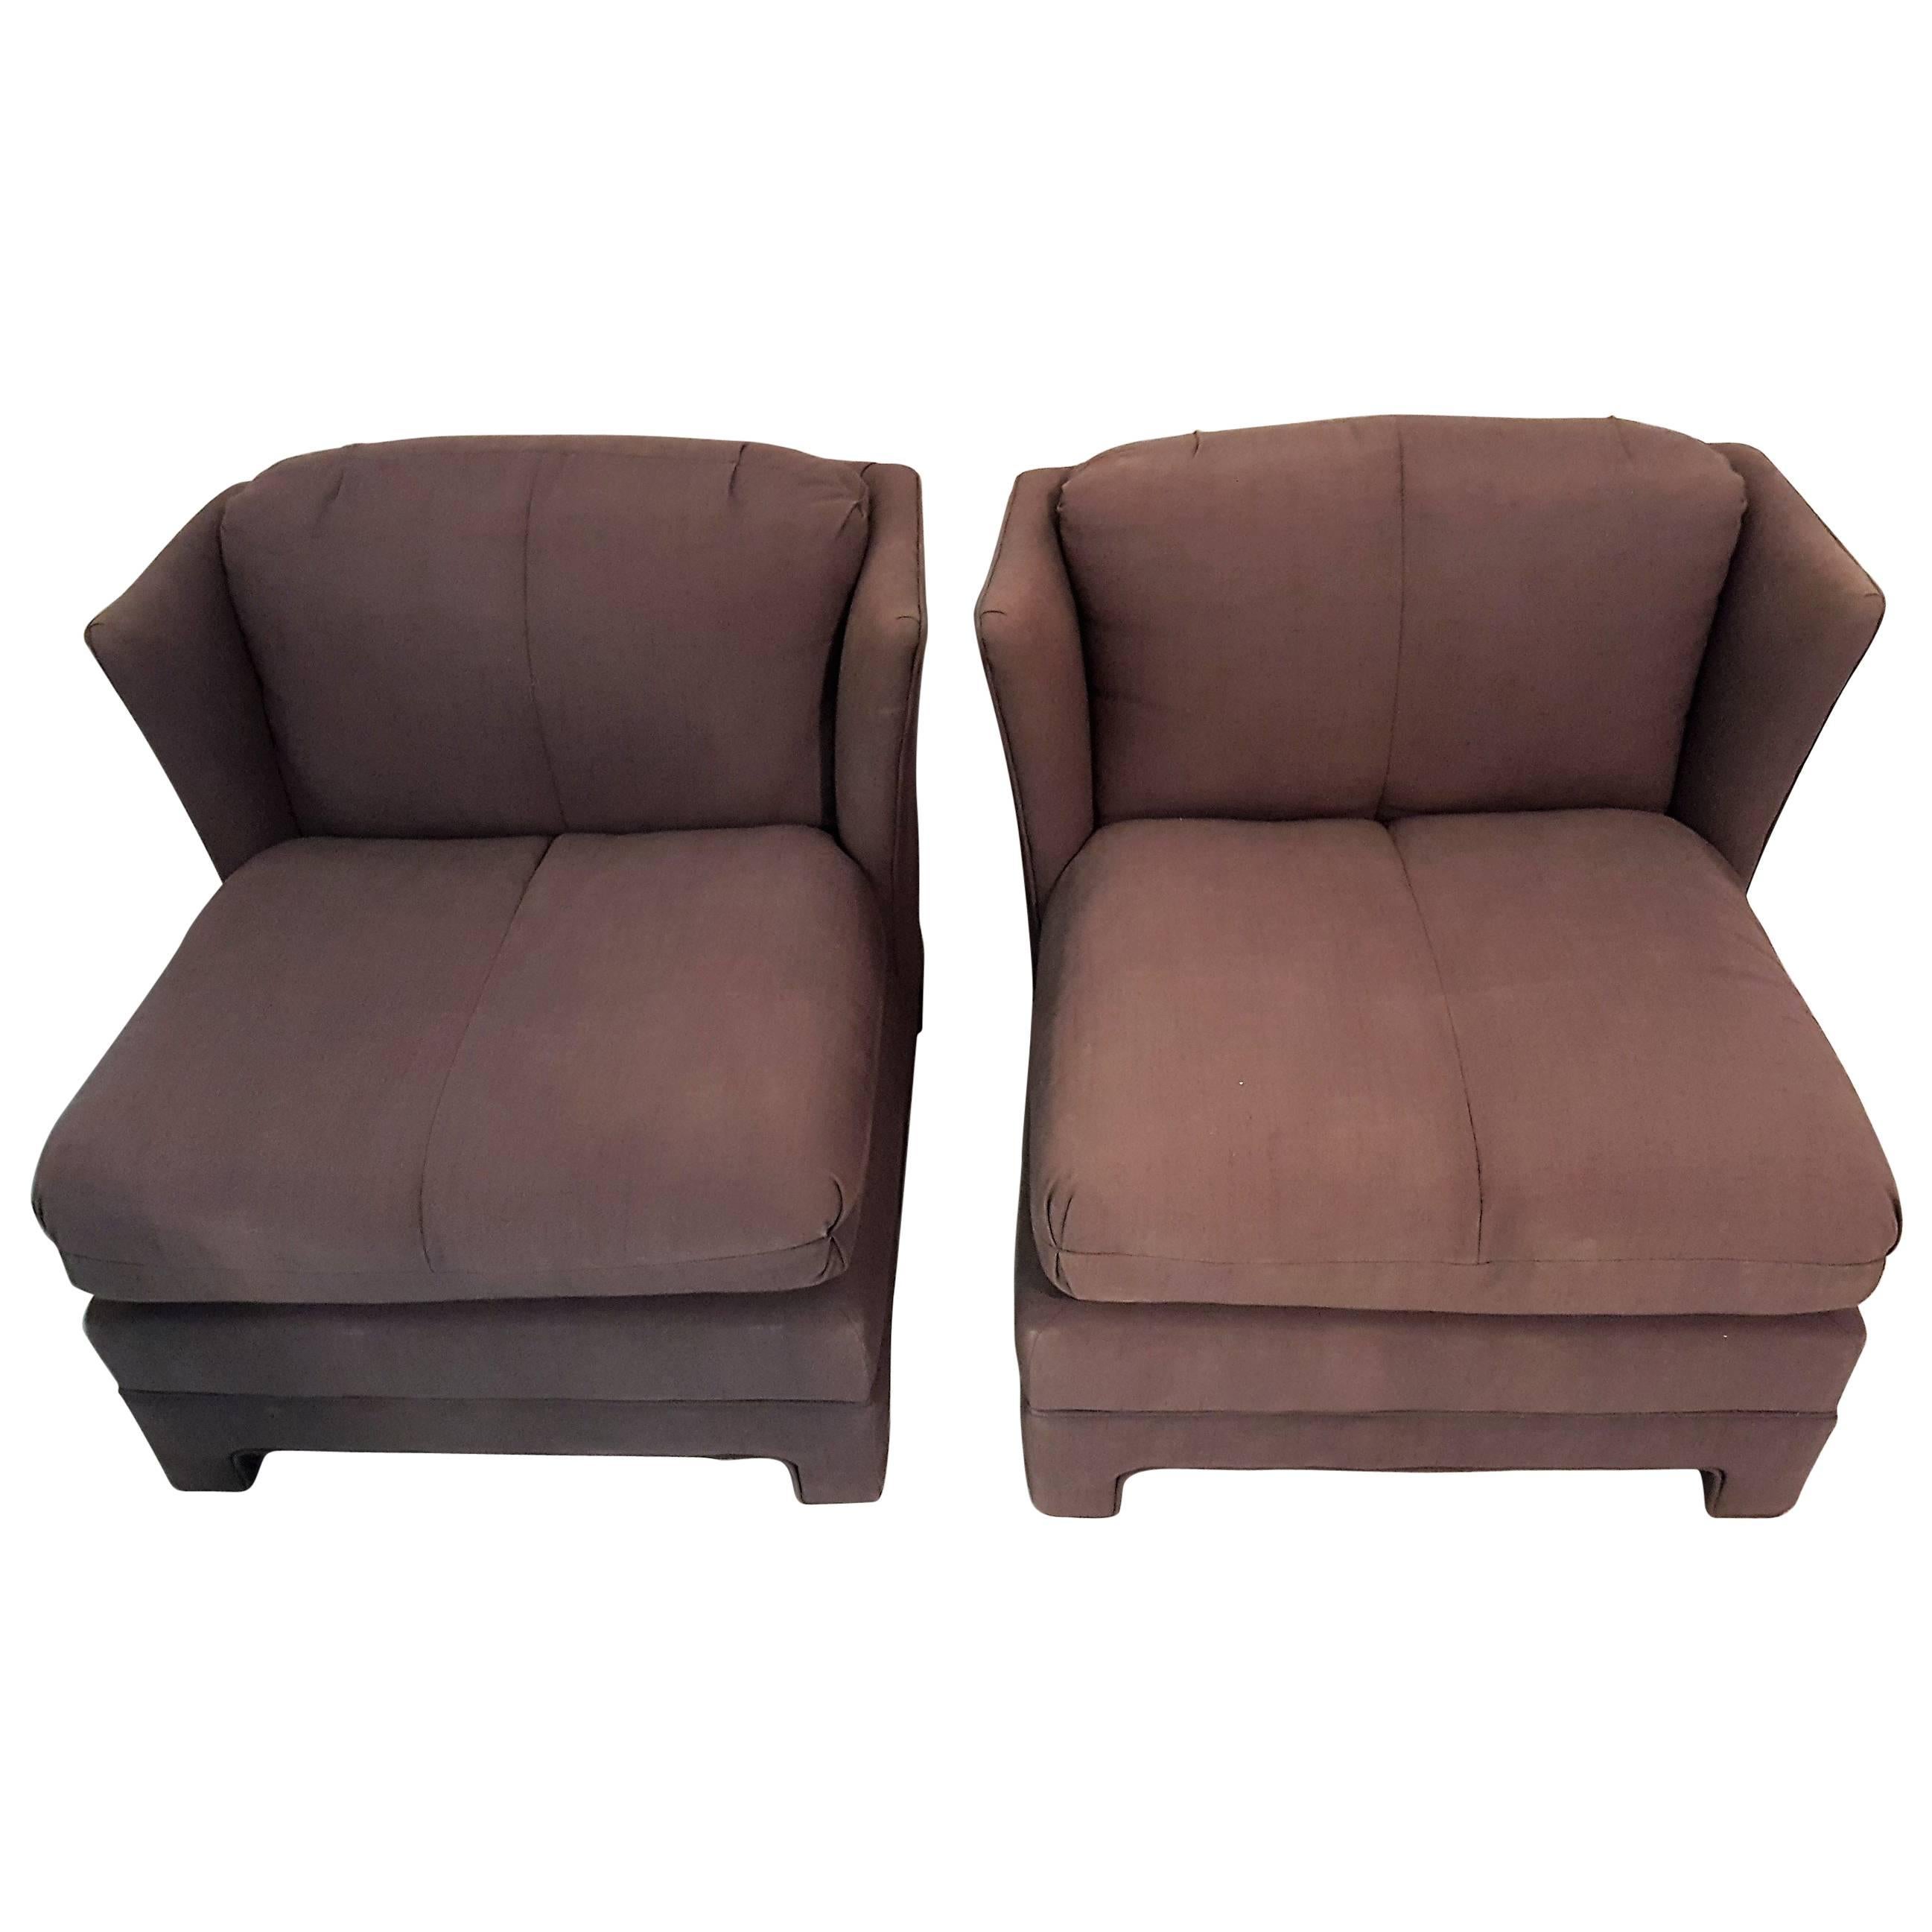 Pair of 20th Century Lounge Chairs Attributed to Edward Wormley for Dunbar For Sale